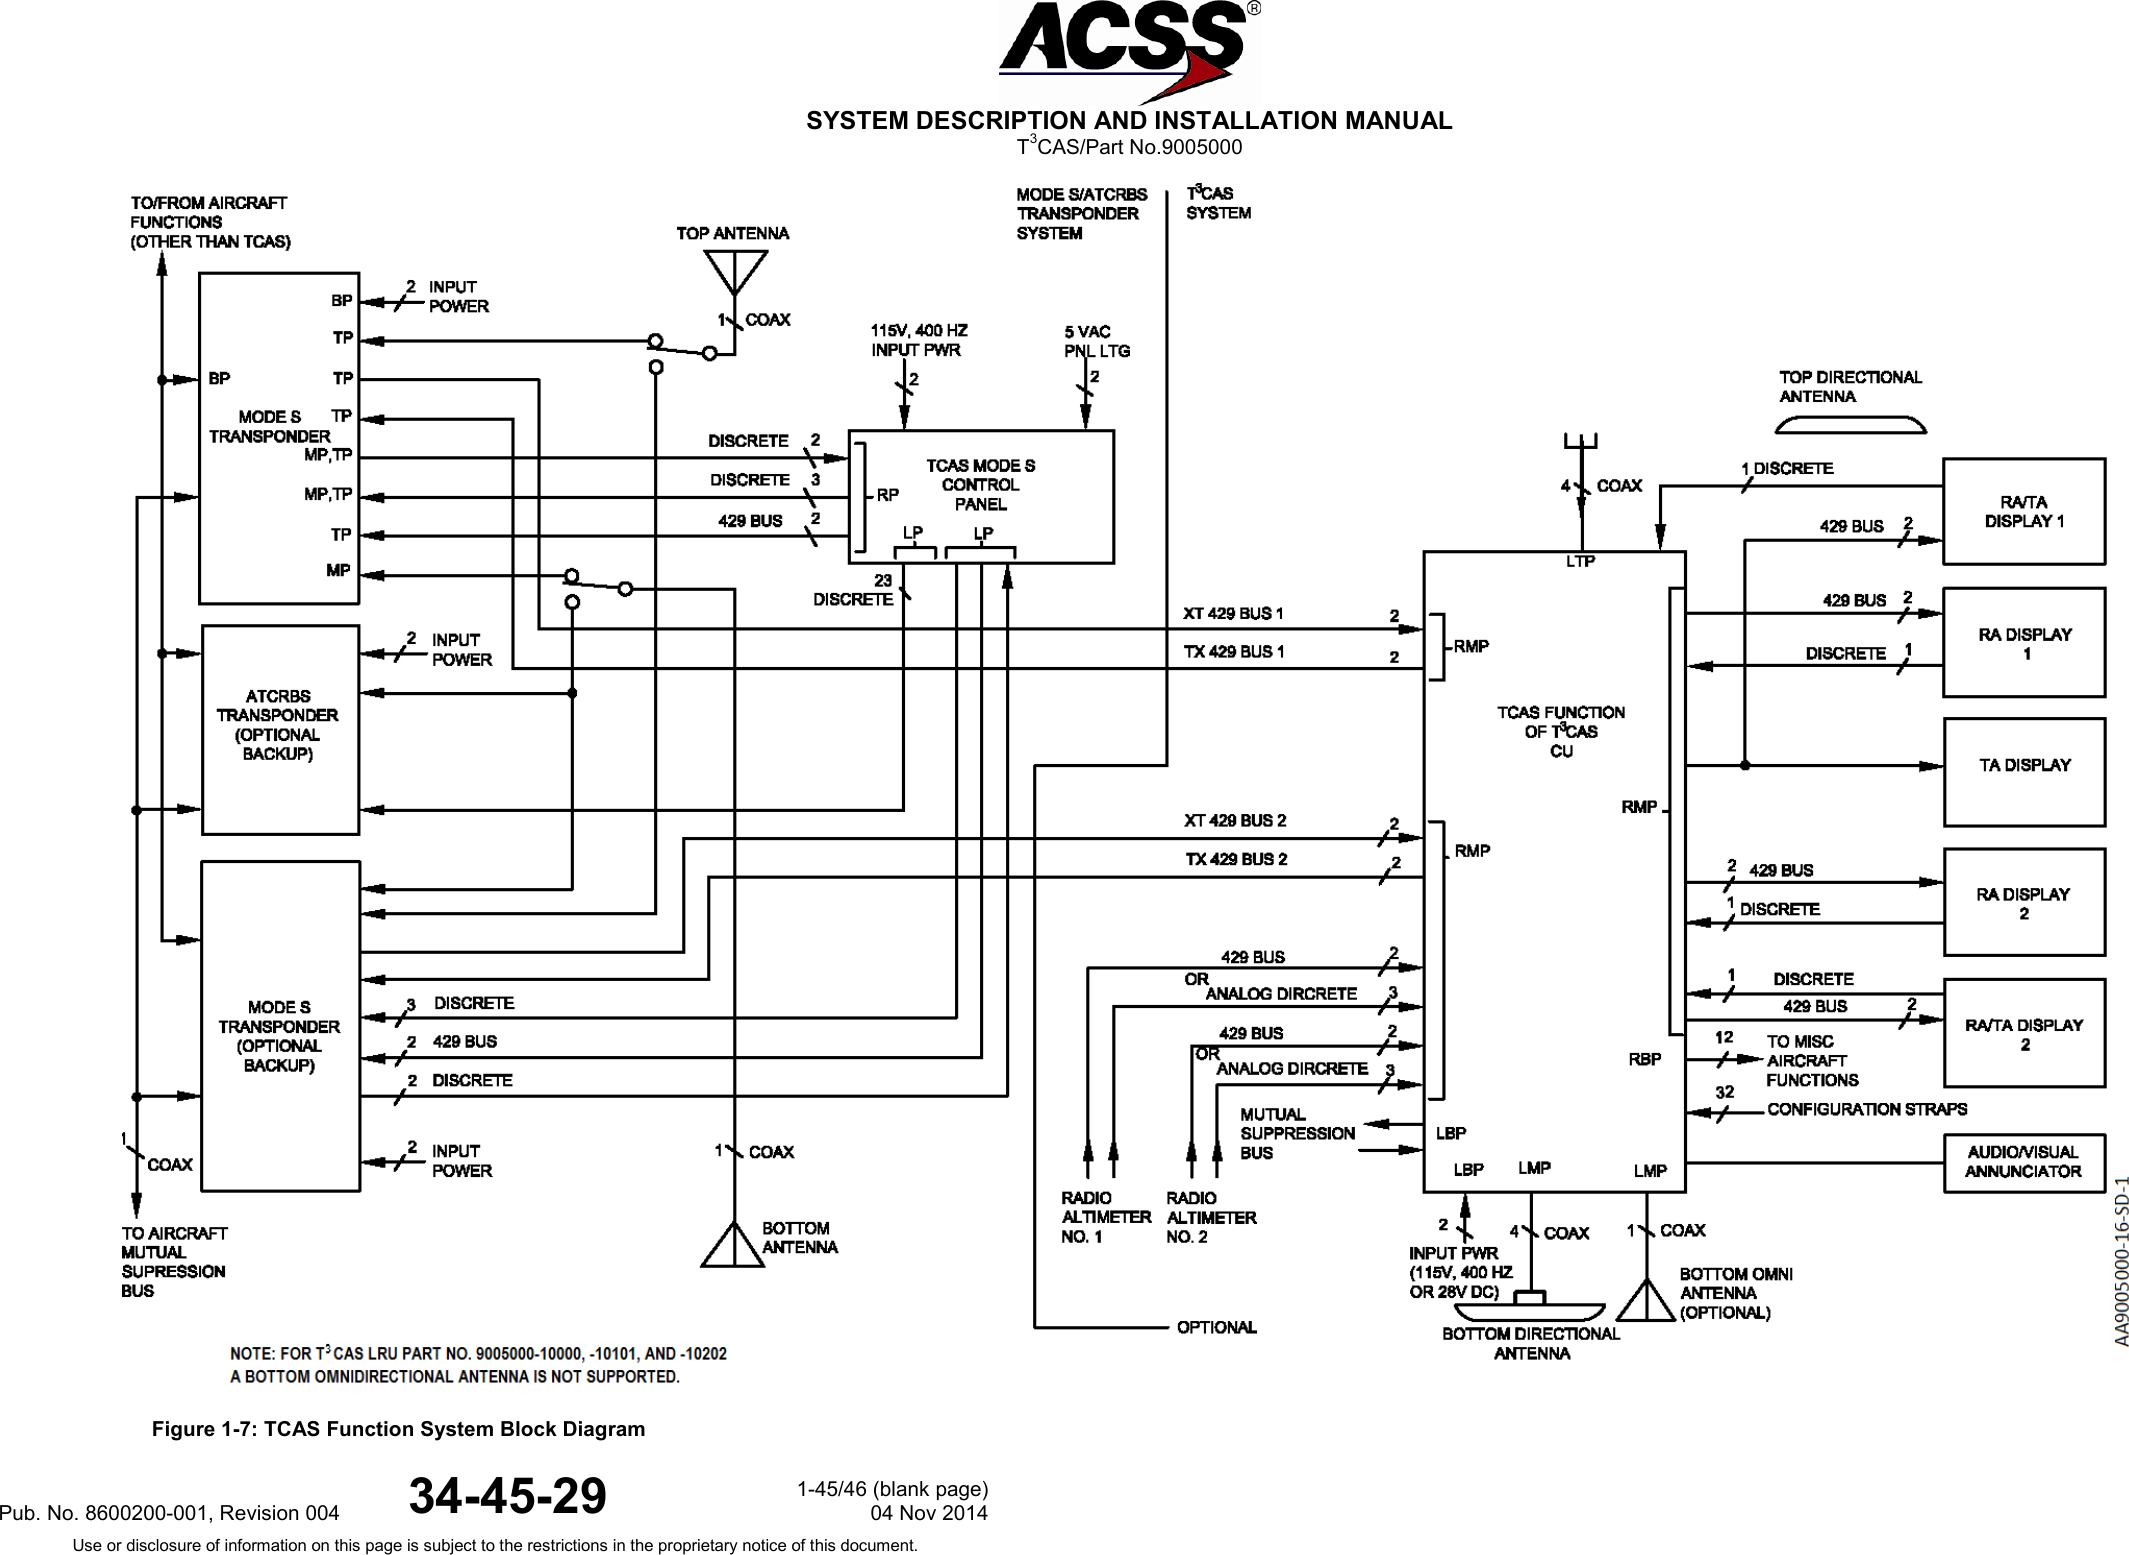  SYSTEM DESCRIPTION AND INSTALLATION MANUAL T3CAS/Part No.9005000  Figure 1-7: TCAS Function System Block Diagram Pub. No. 8600200-001, Revision 004 34-45-29 1-45/46 (blank page) 04 Nov 2014 Use or disclosure of information on this page is subject to the restrictions in the proprietary notice of this document.  